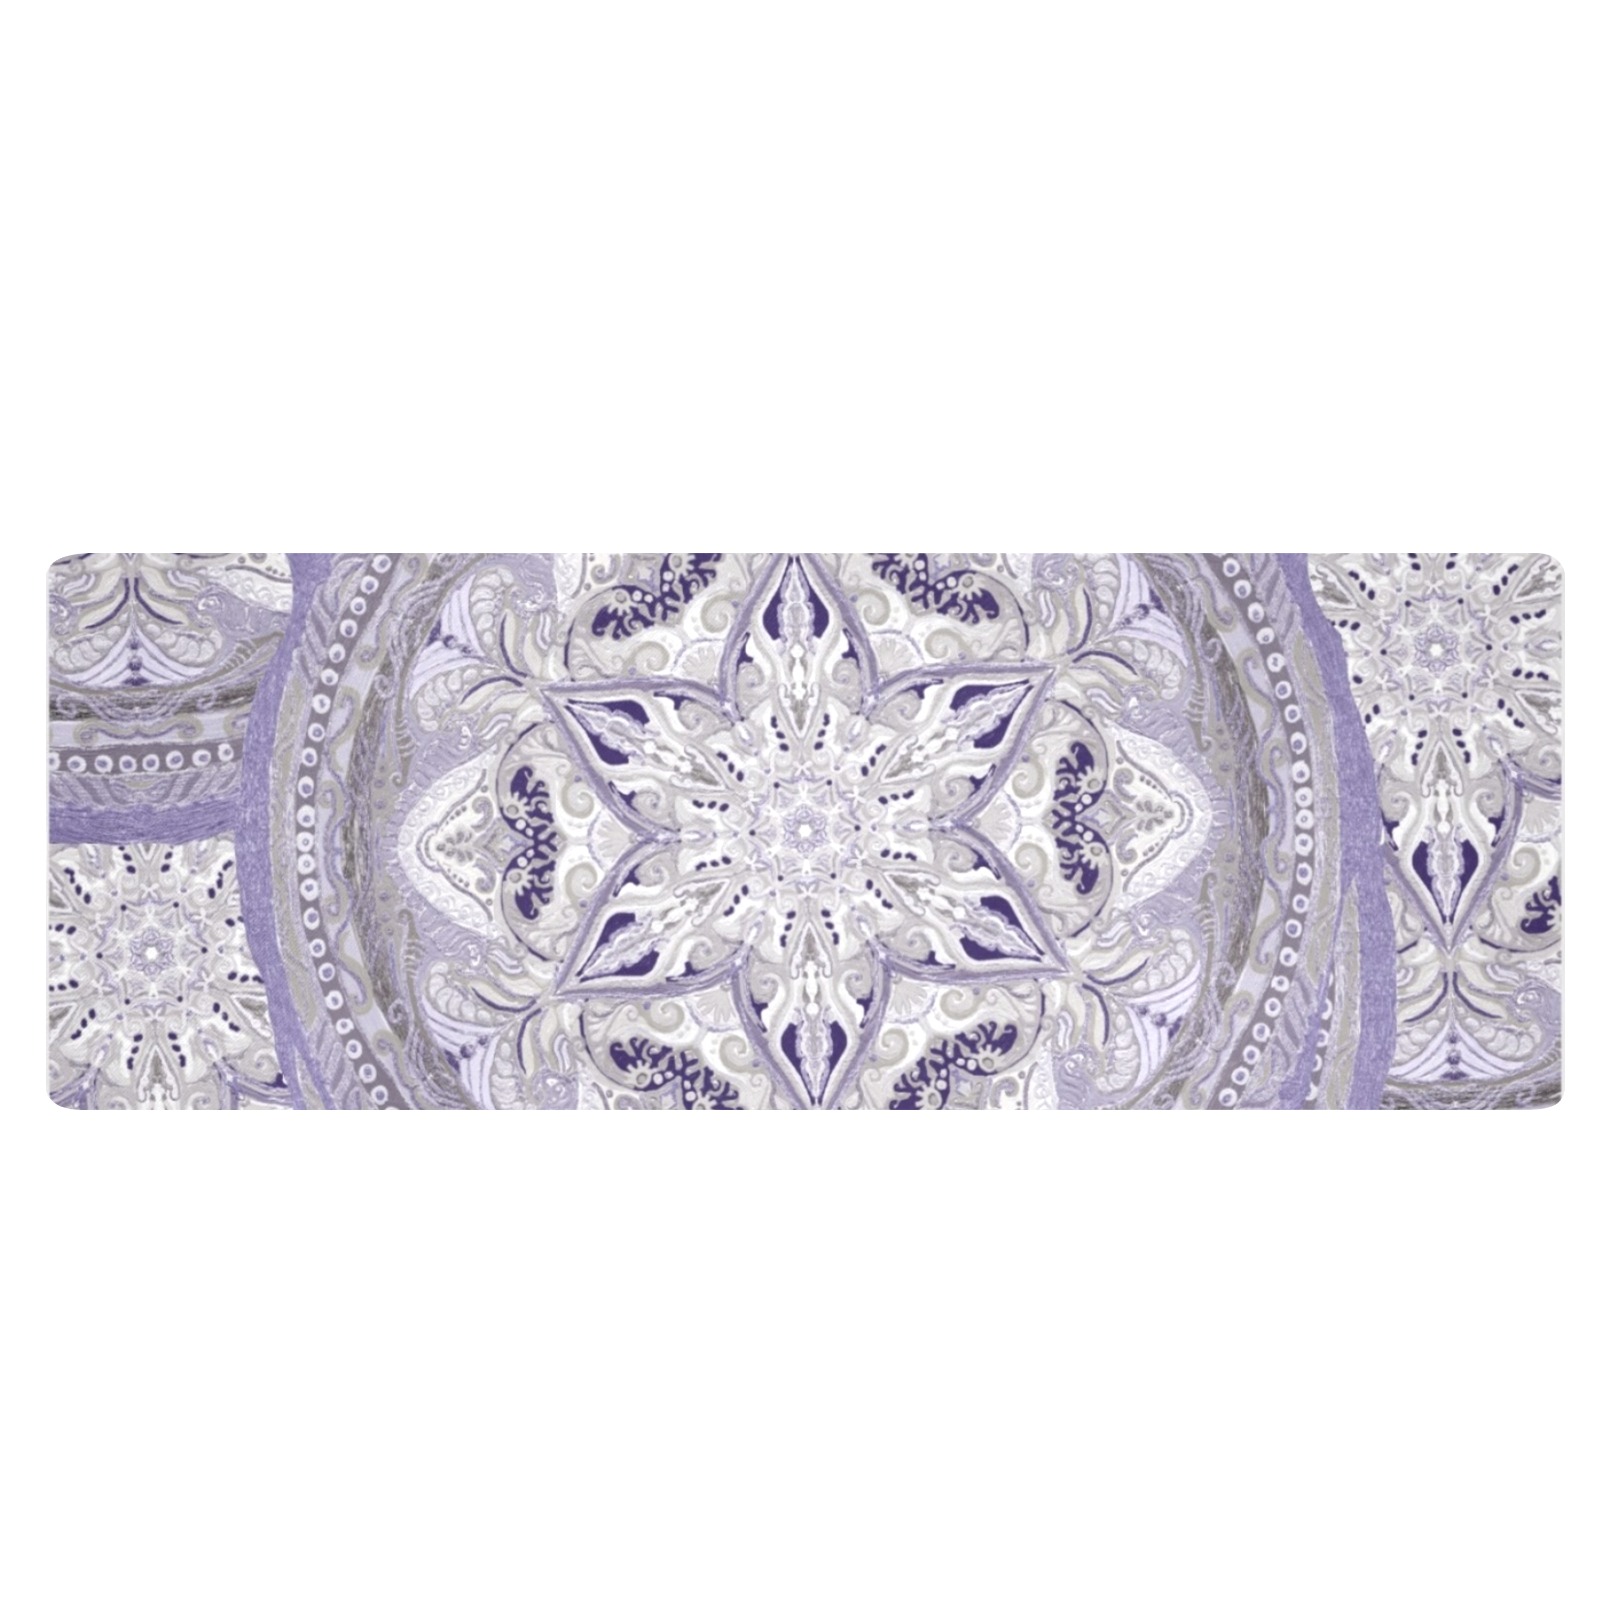 embroidery-pale purple and beige Kitchen Mat 48"x17"